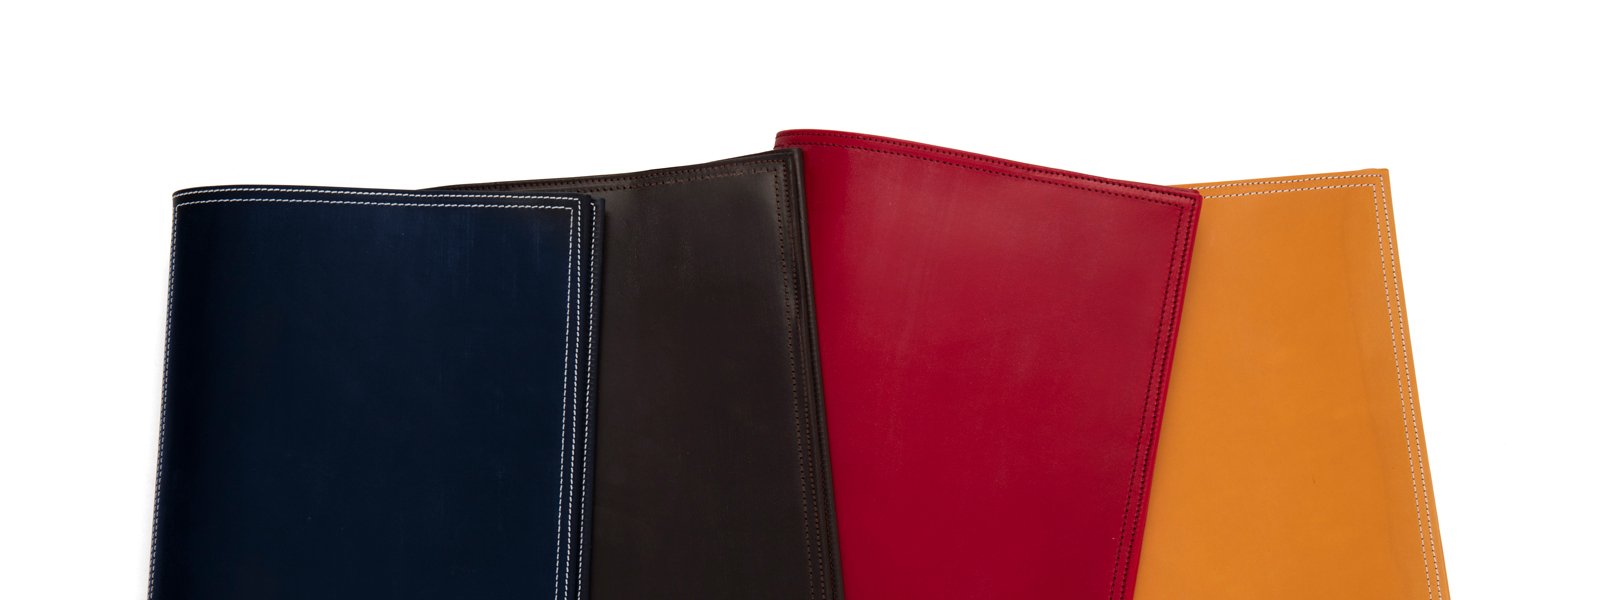 Leather Document Holders & Cases